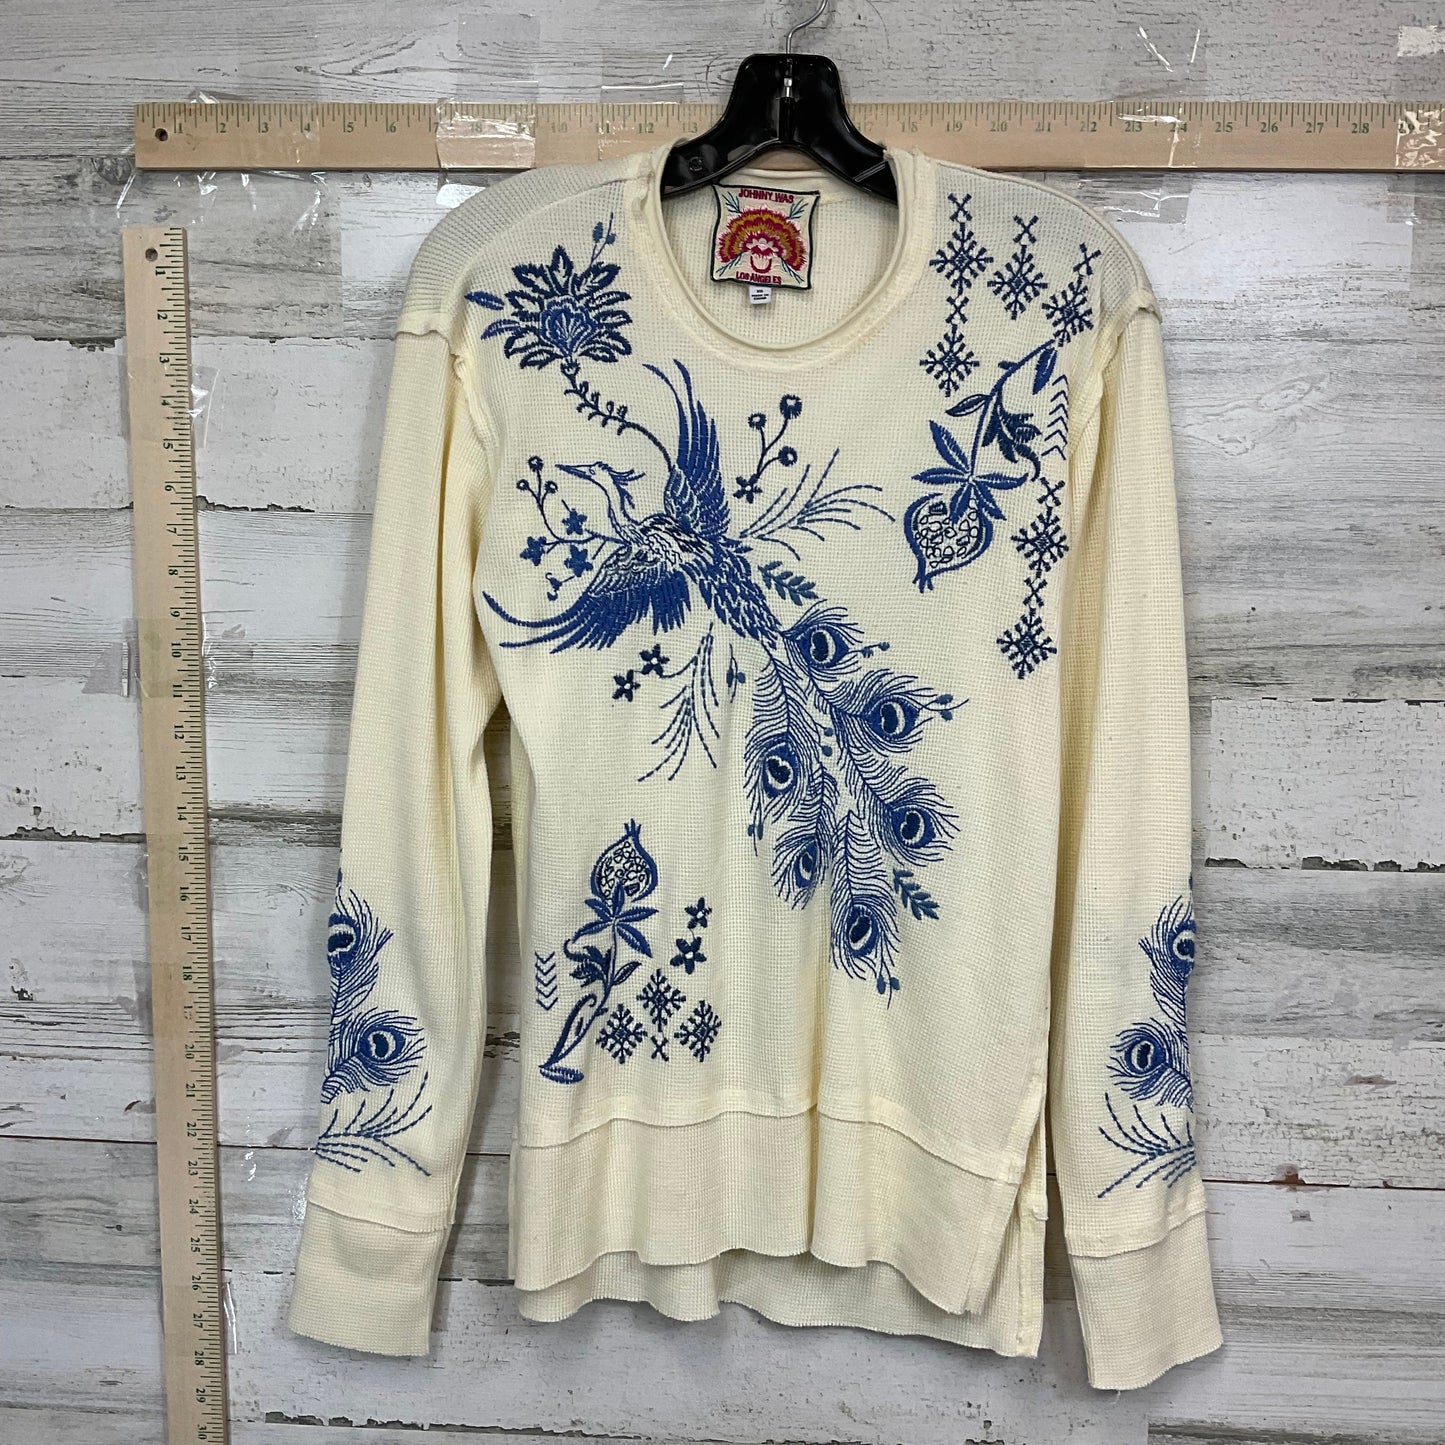 Cream Top Long Sleeve Johnny Was, Size Xs